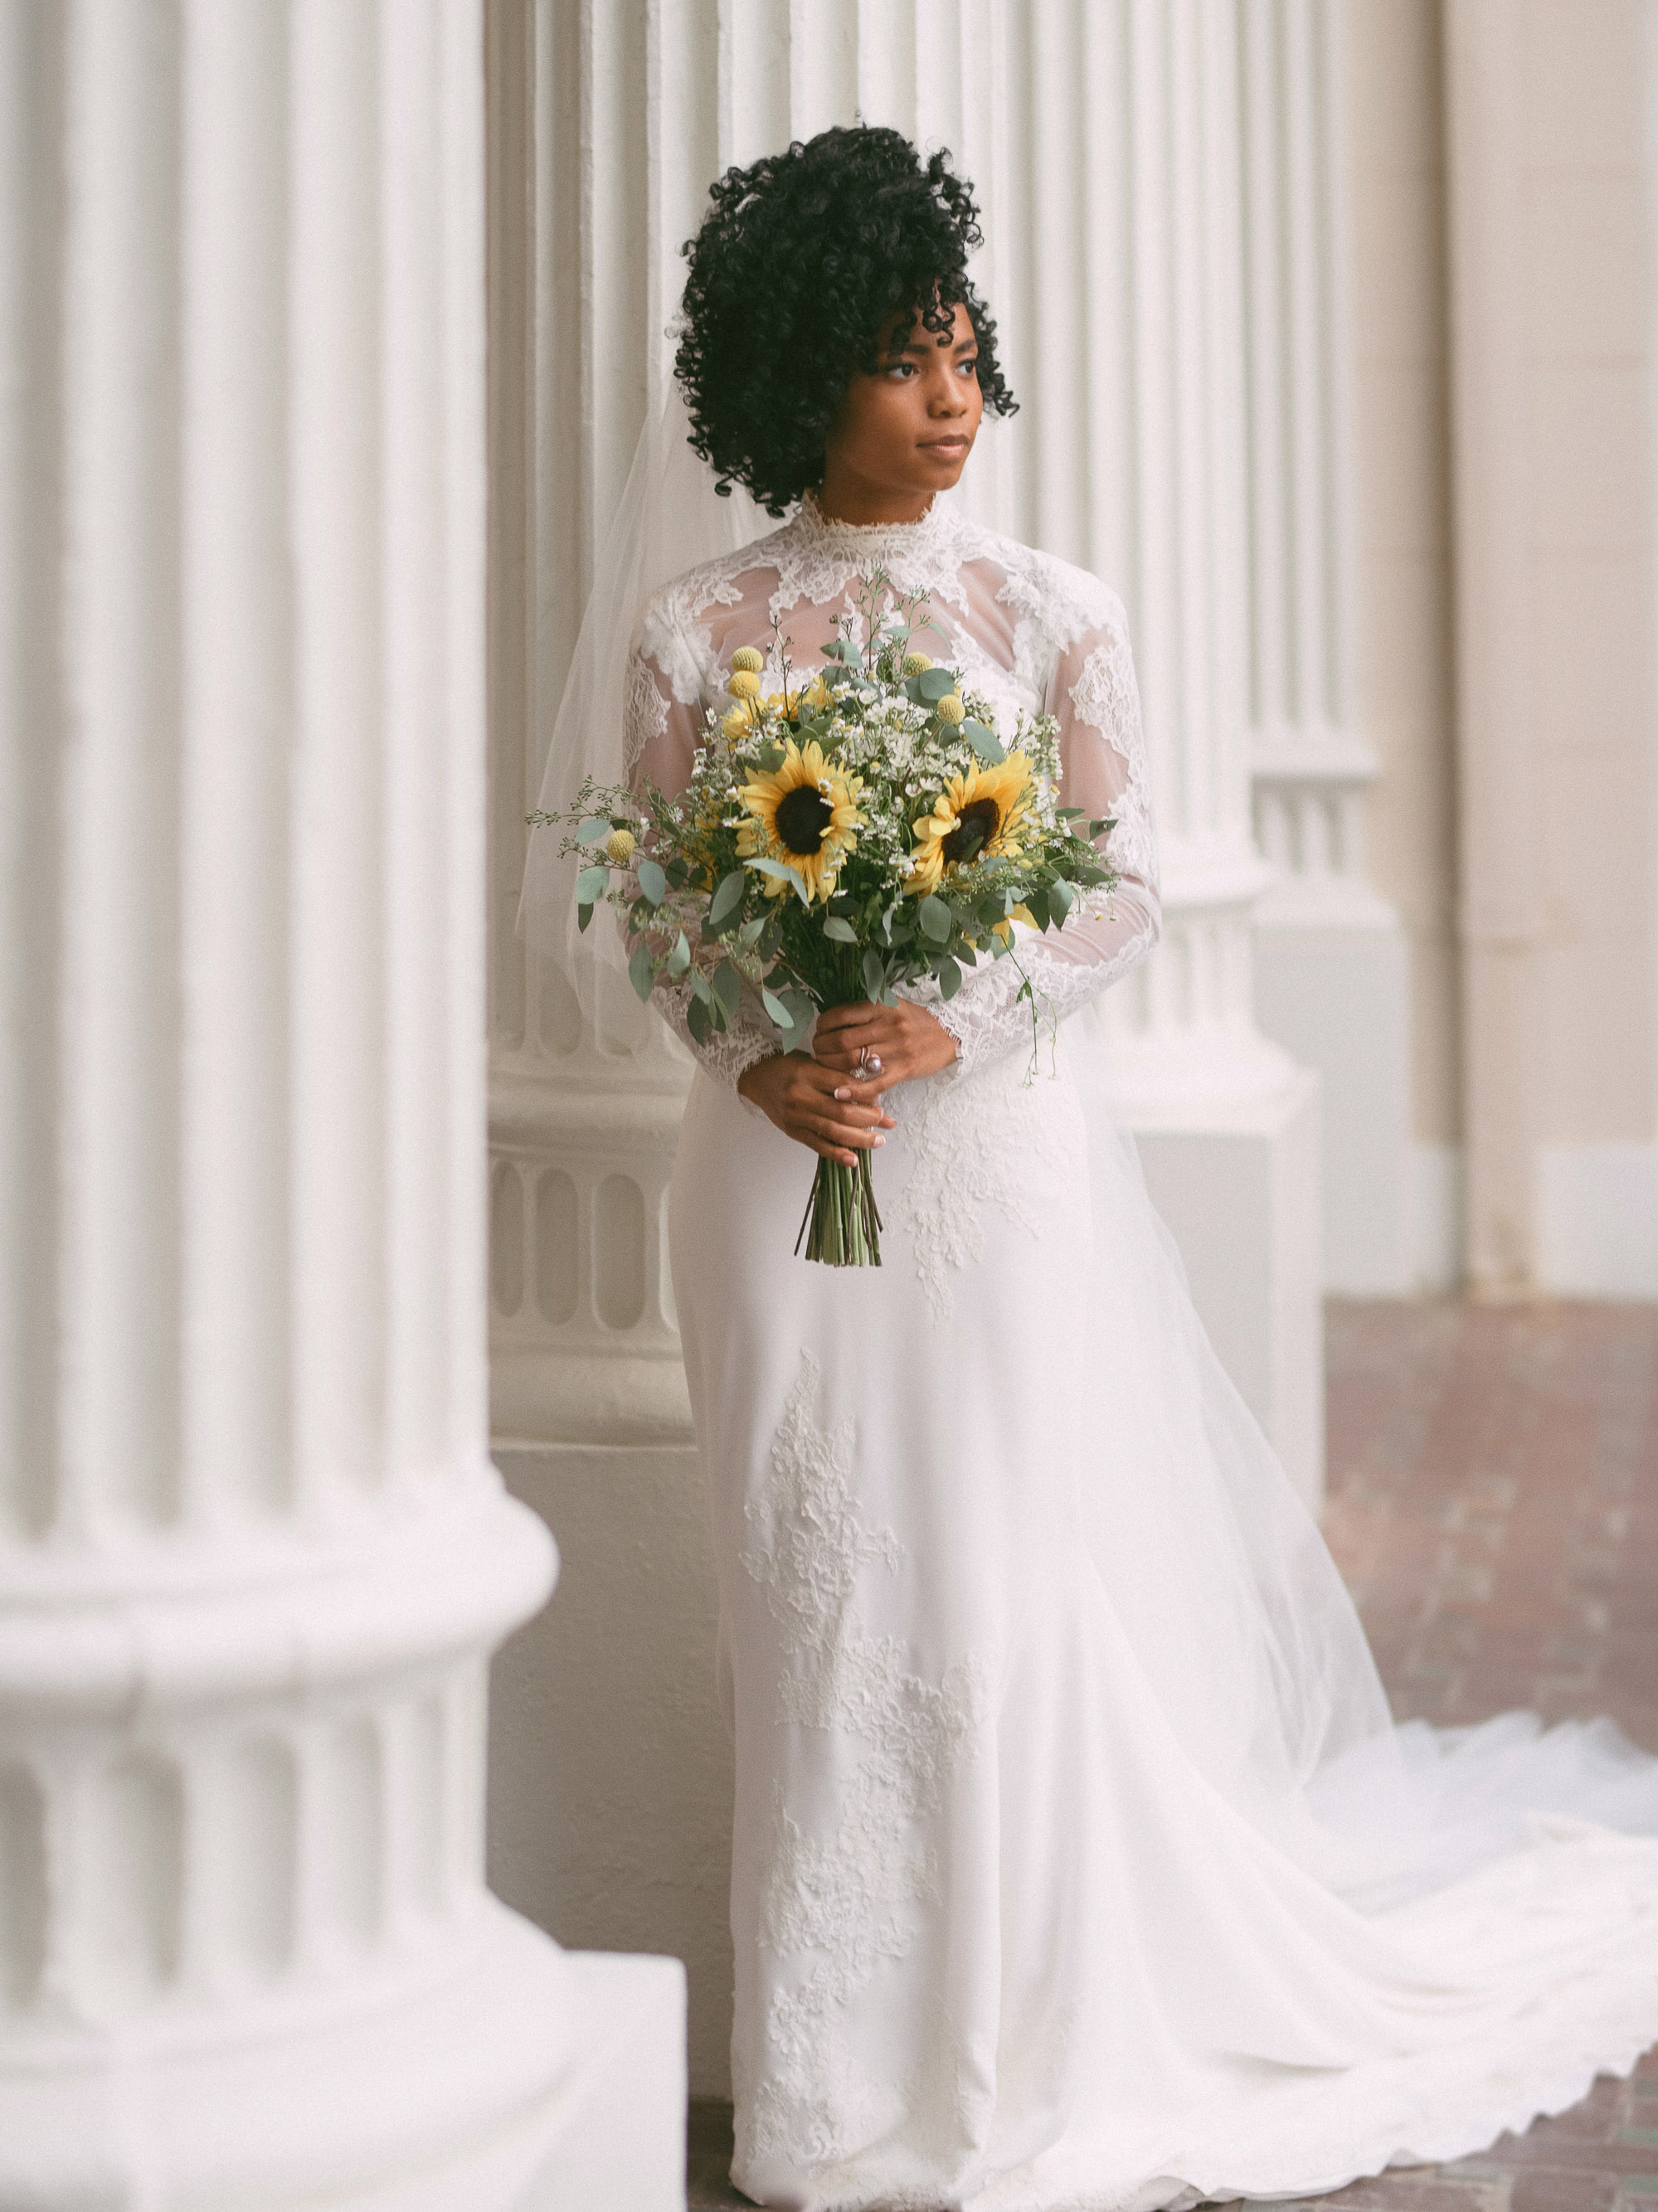 A bride with a bouquet of sunflowers in front of columns.